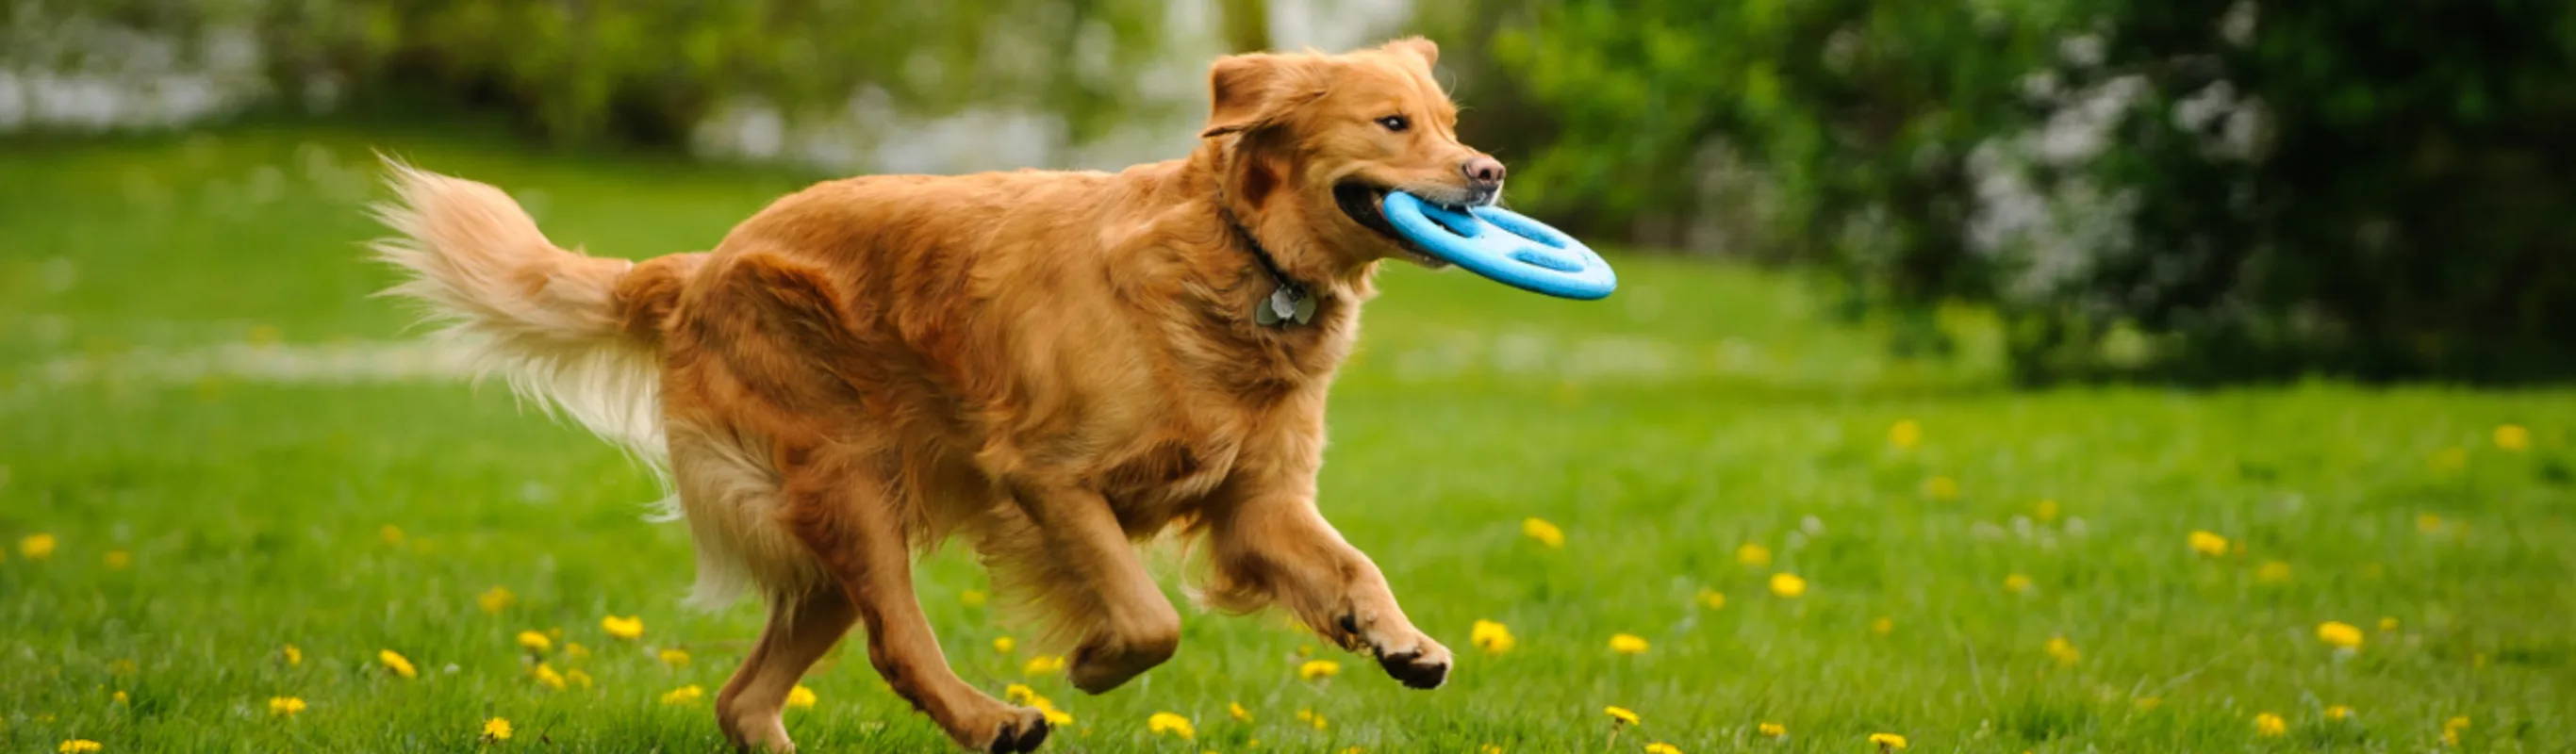 Brown Dog Running with a Frisbee